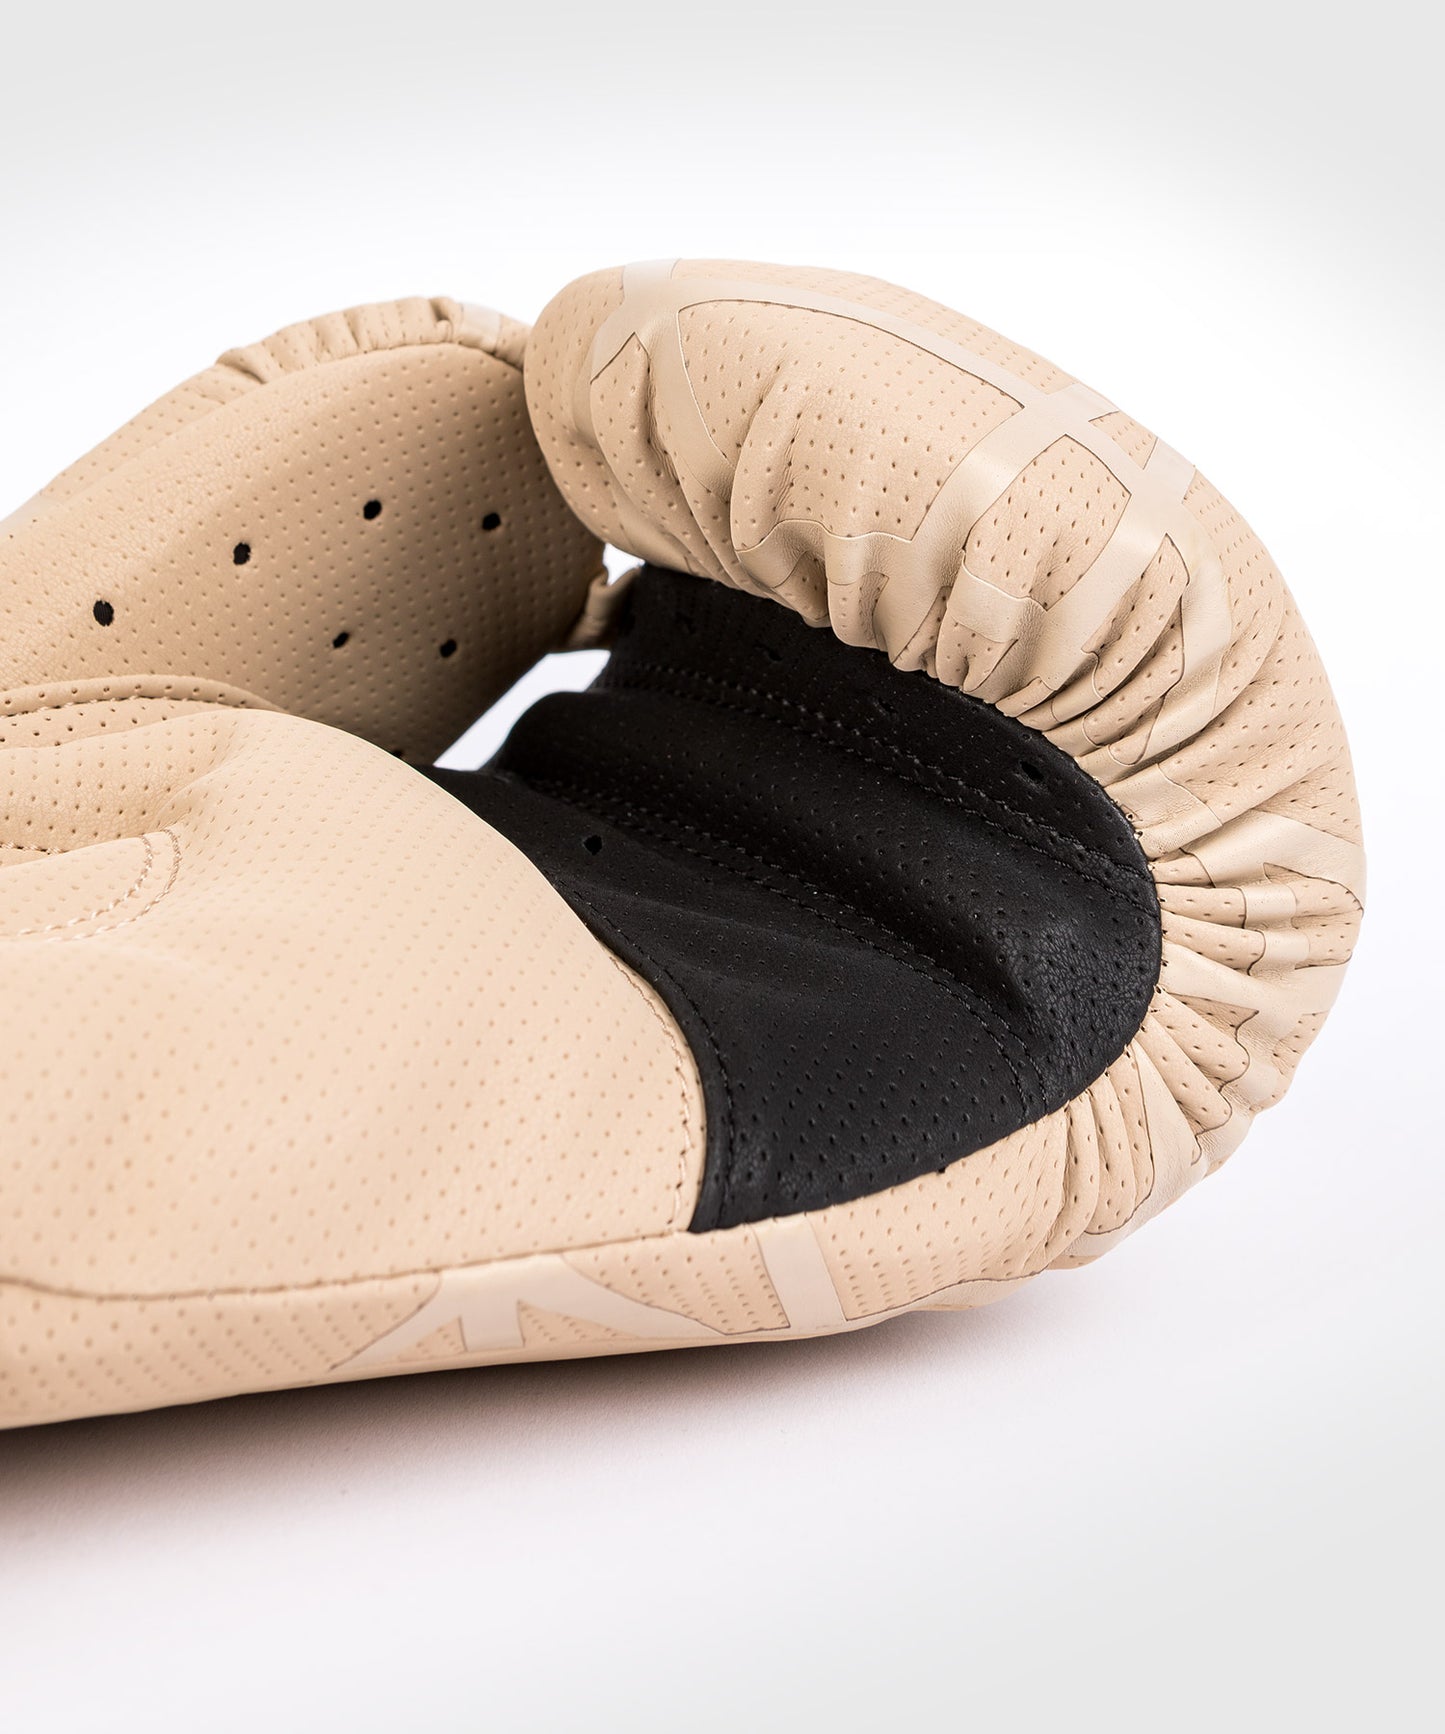 Tecmo 2.0 Boxing Gloves - Sand